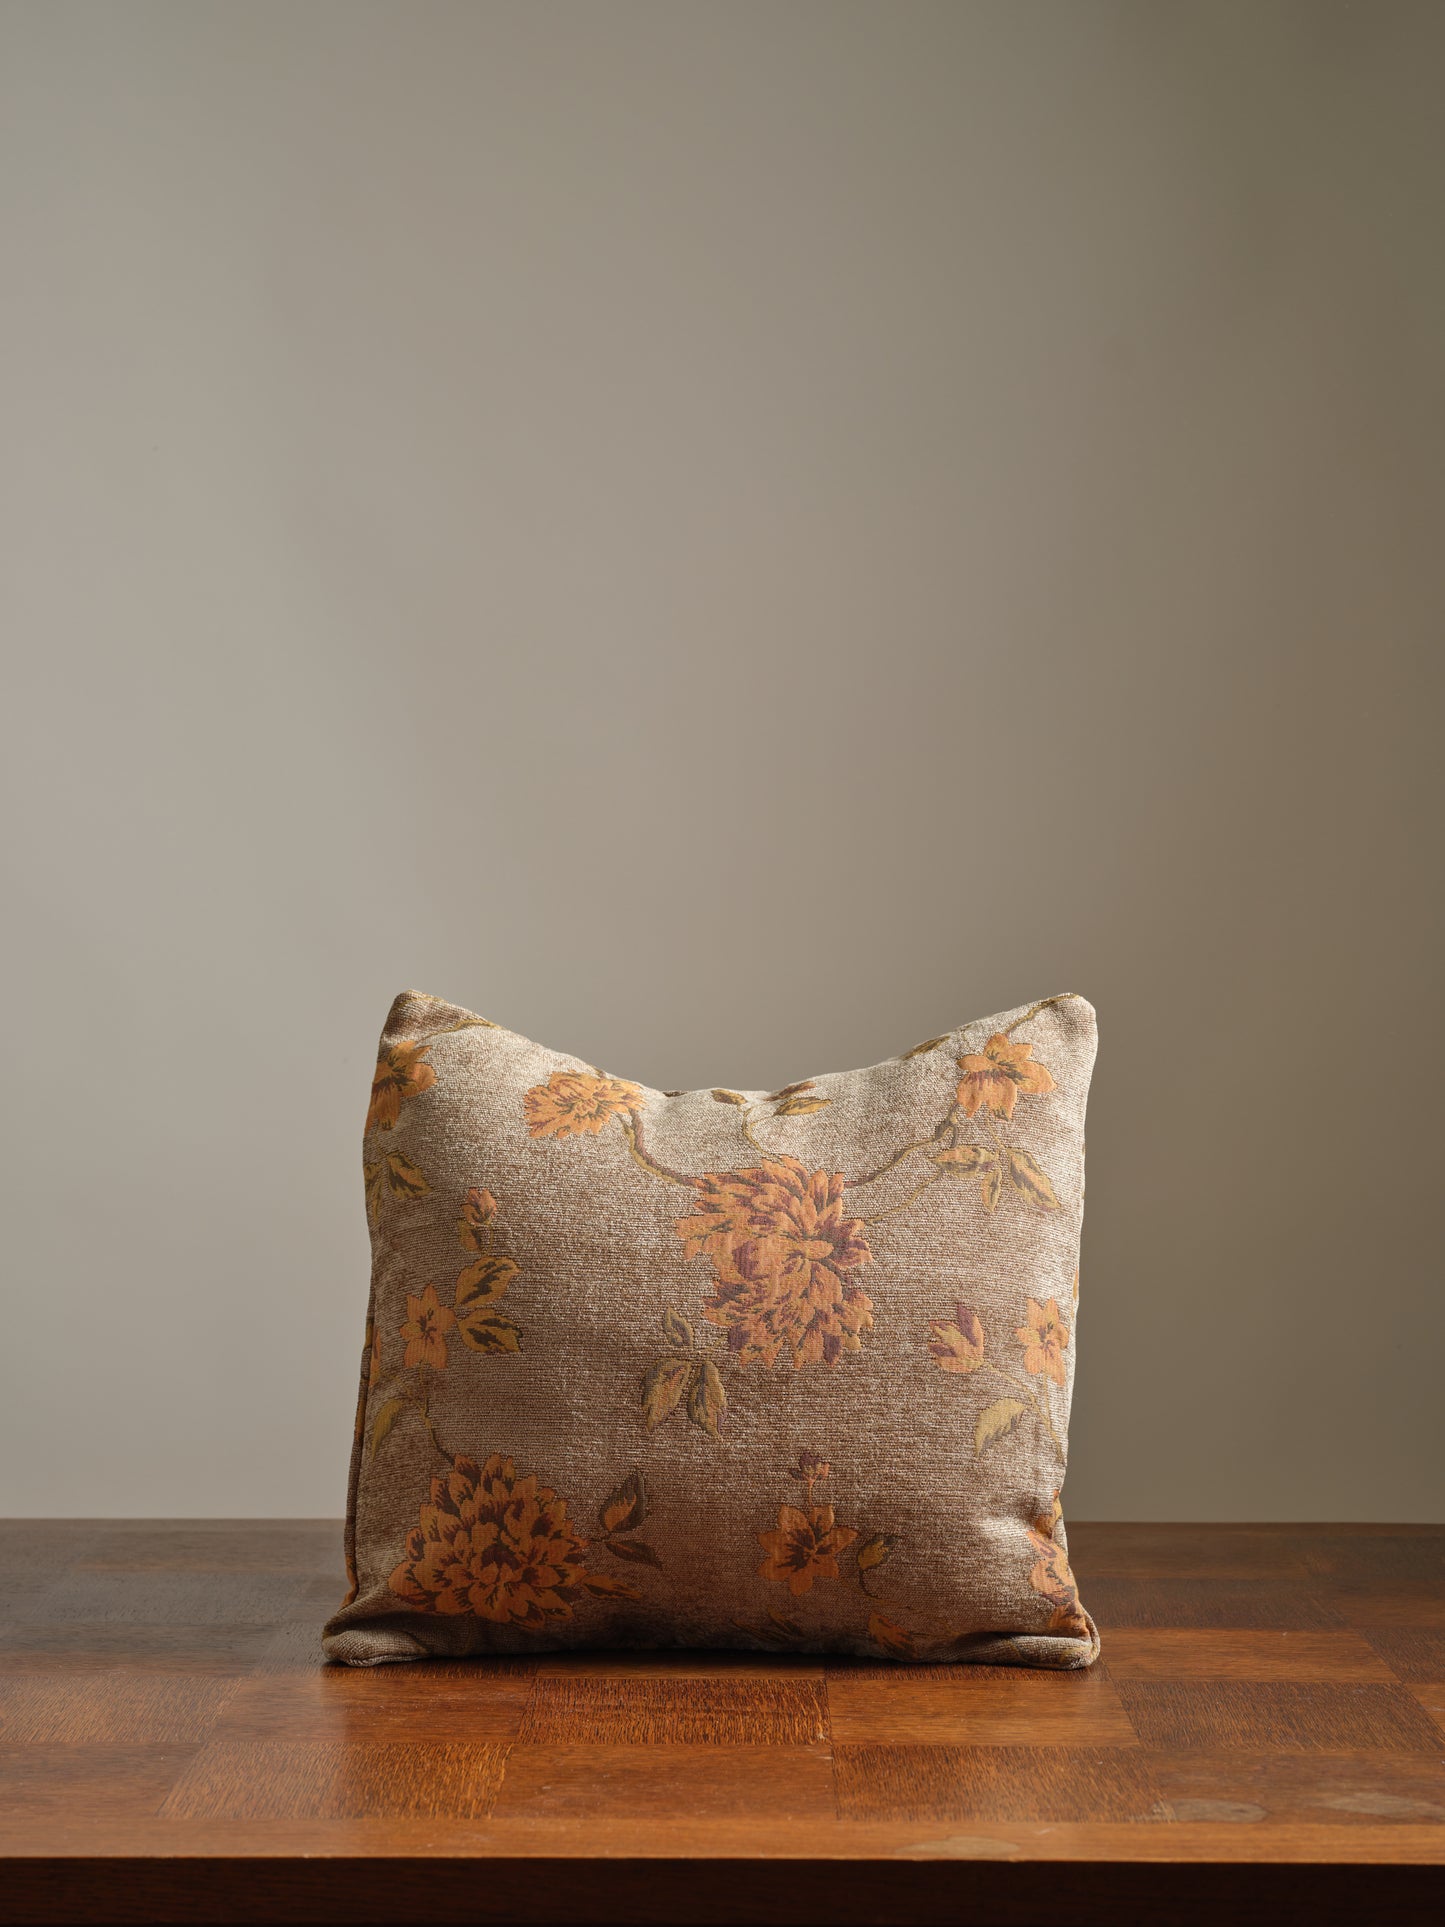 Charlotte Tapestry Pillow 18 x 18